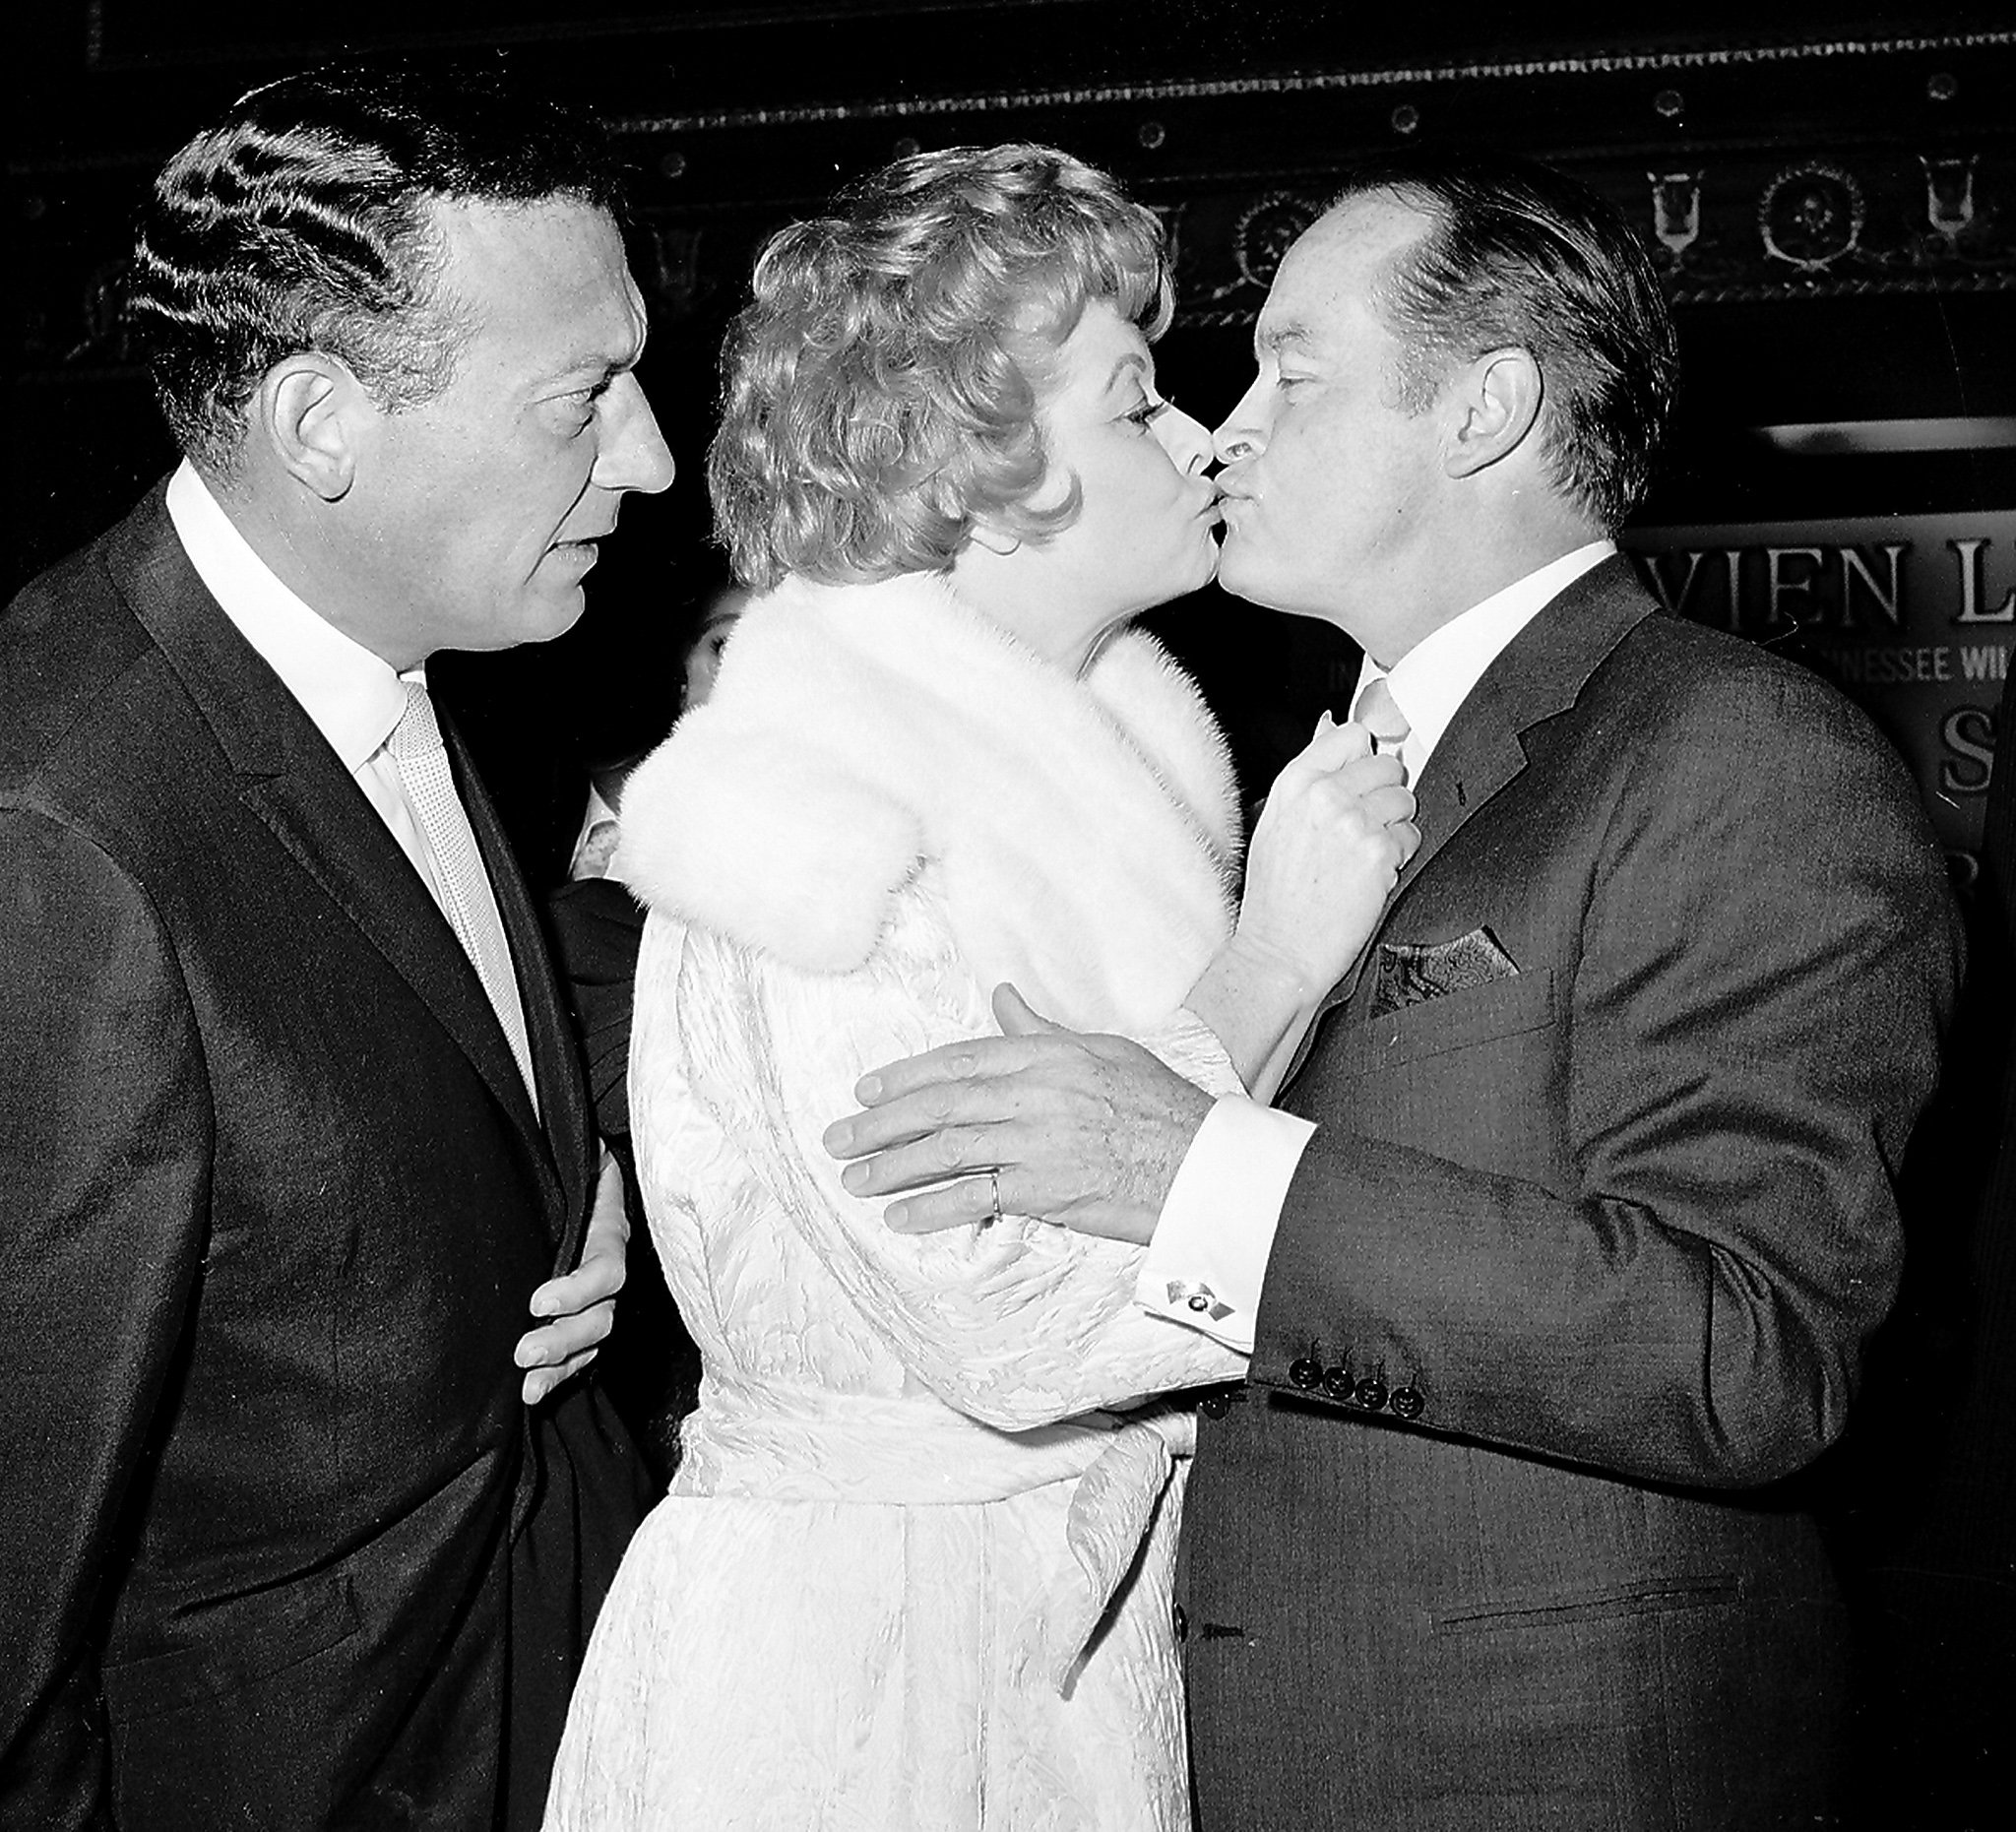 From left to right: Comedian Gary Morton, his wife Lucille Ball, and entertainer Bob Hope. Morton looks on with feigned worry as Ball and Hope greet one another with a kiss.